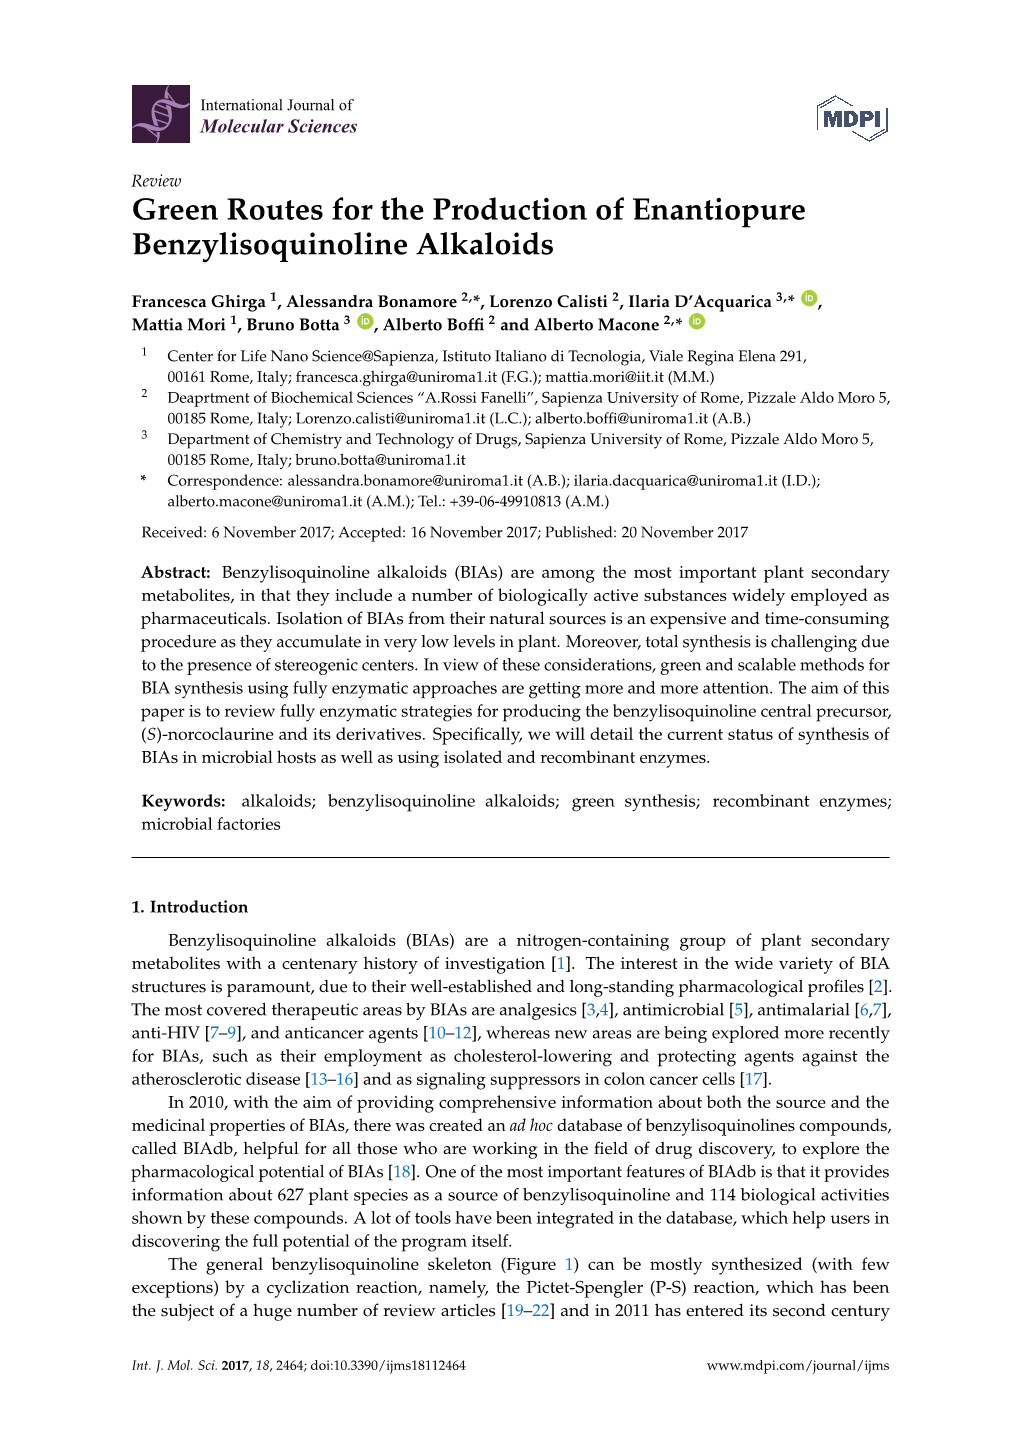 Green Routes for the Production of Enantiopure Benzylisoquinoline Alkaloids